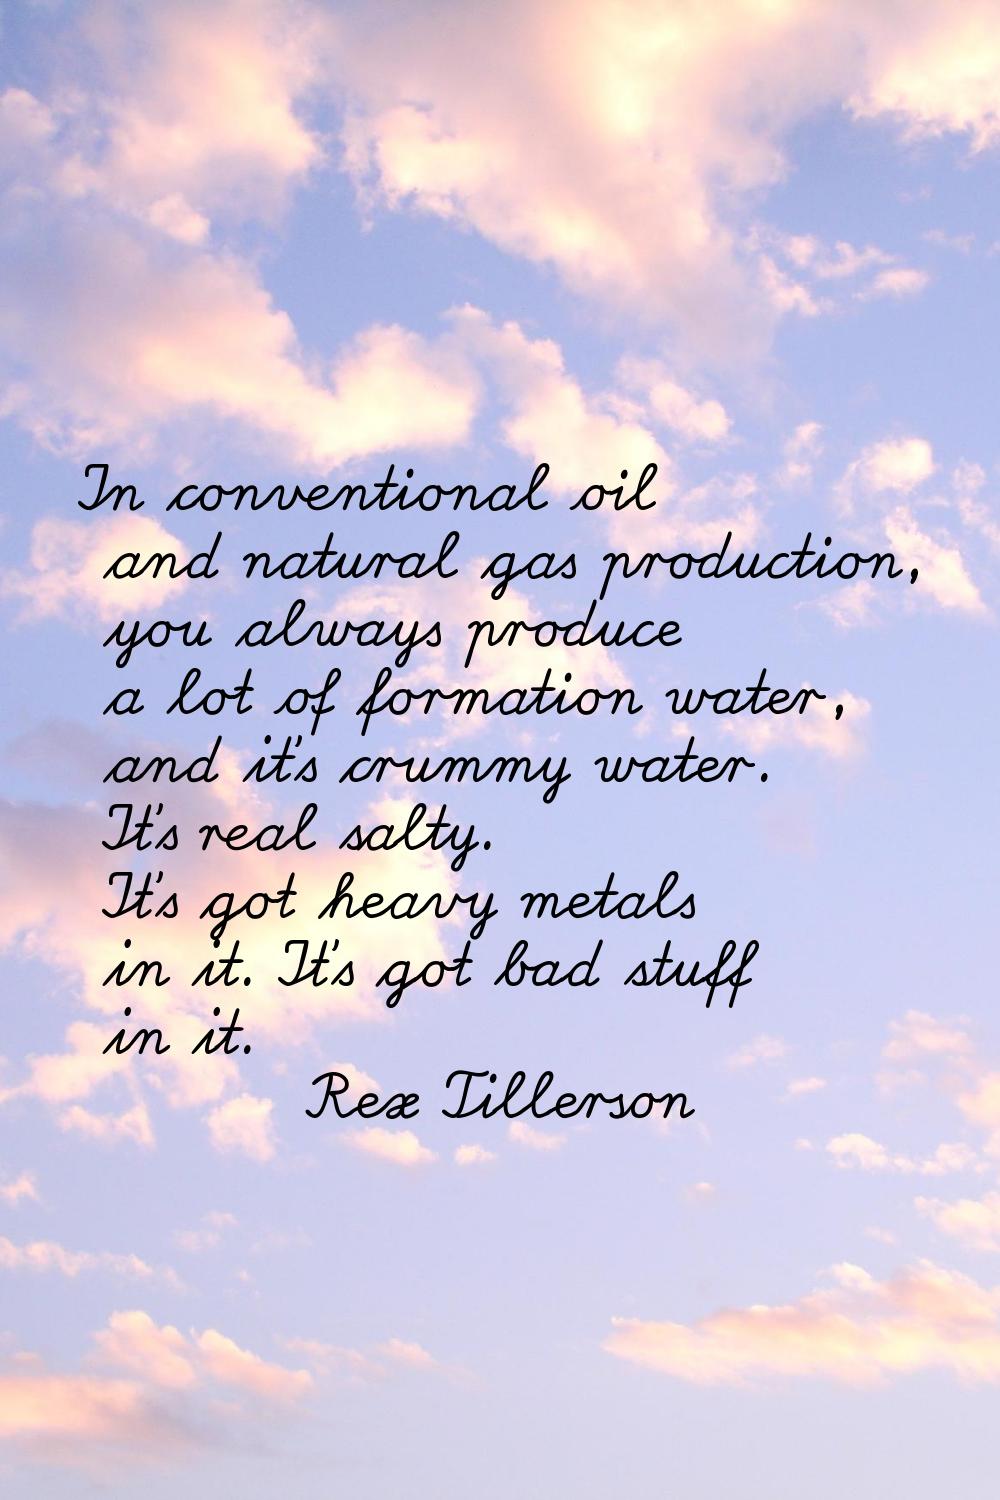 In conventional oil and natural gas production, you always produce a lot of formation water, and it